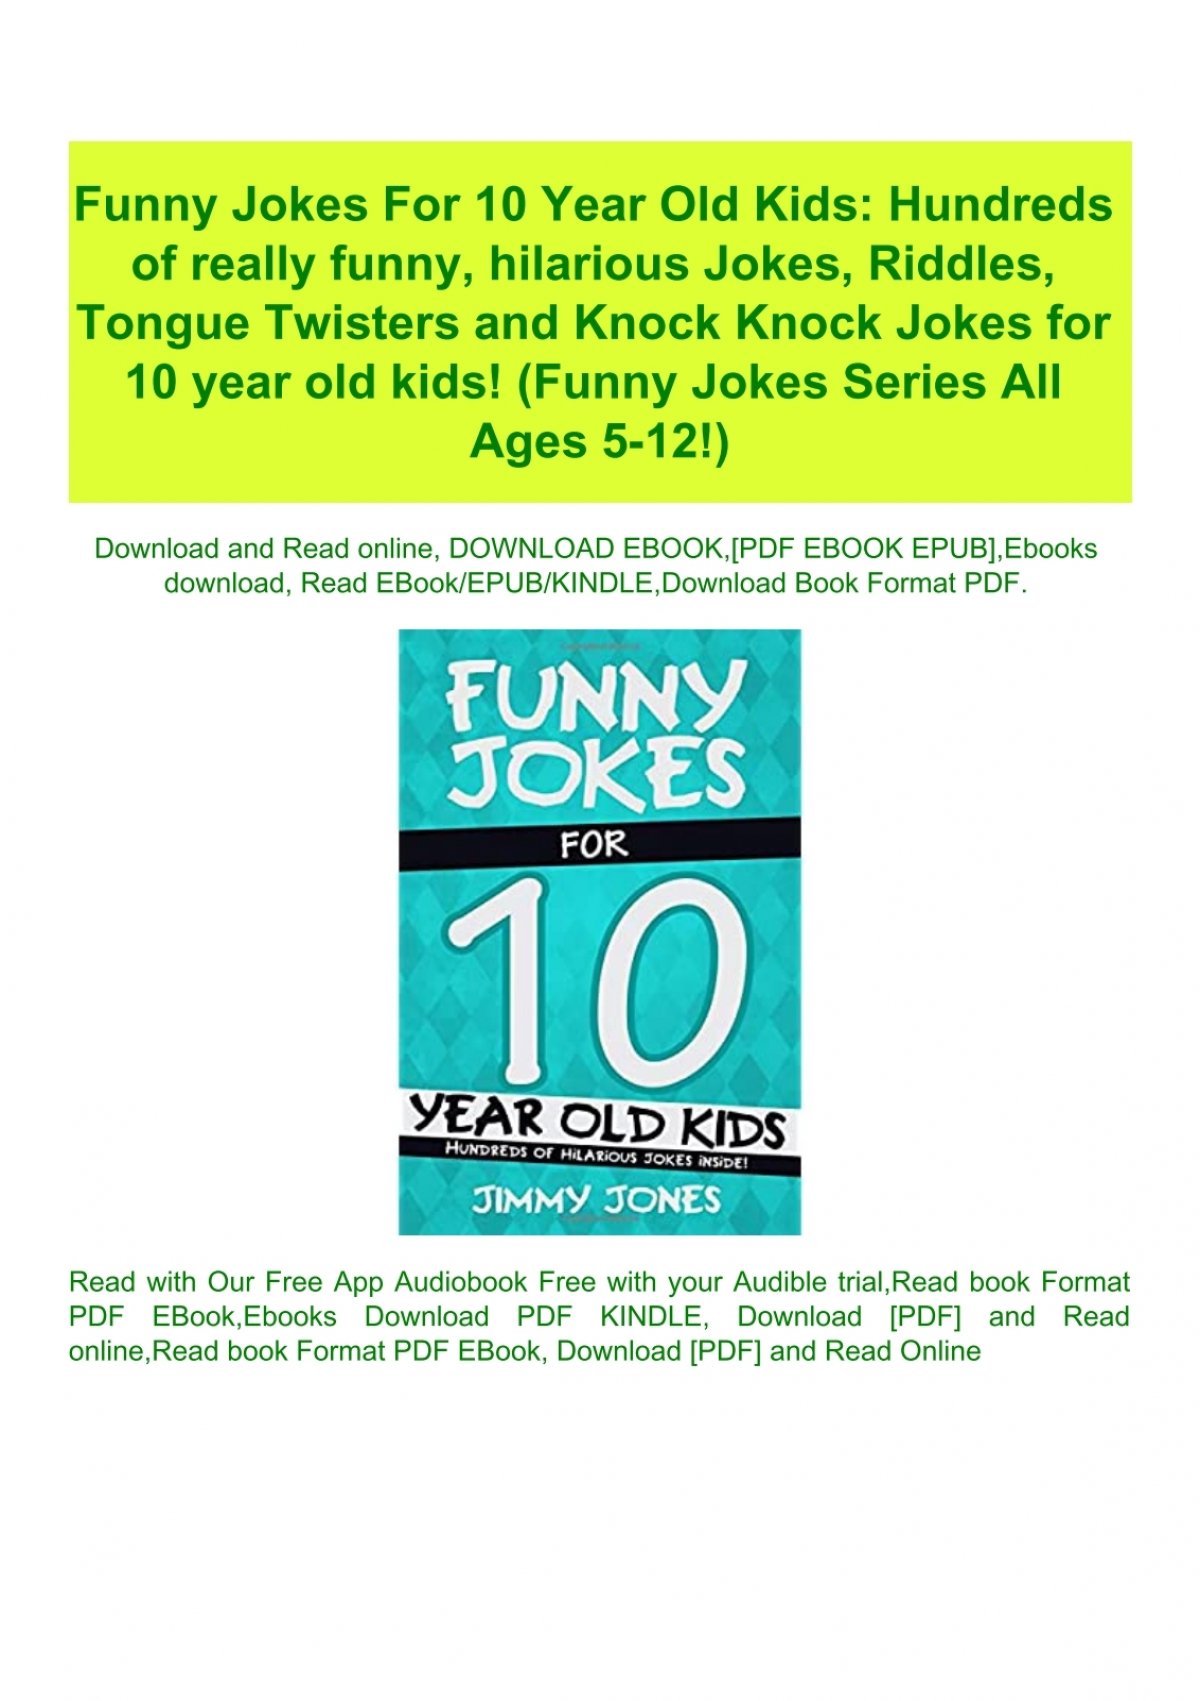 PDF) Funny Jokes For 10 Year Old Kids Hundreds of really funny ...